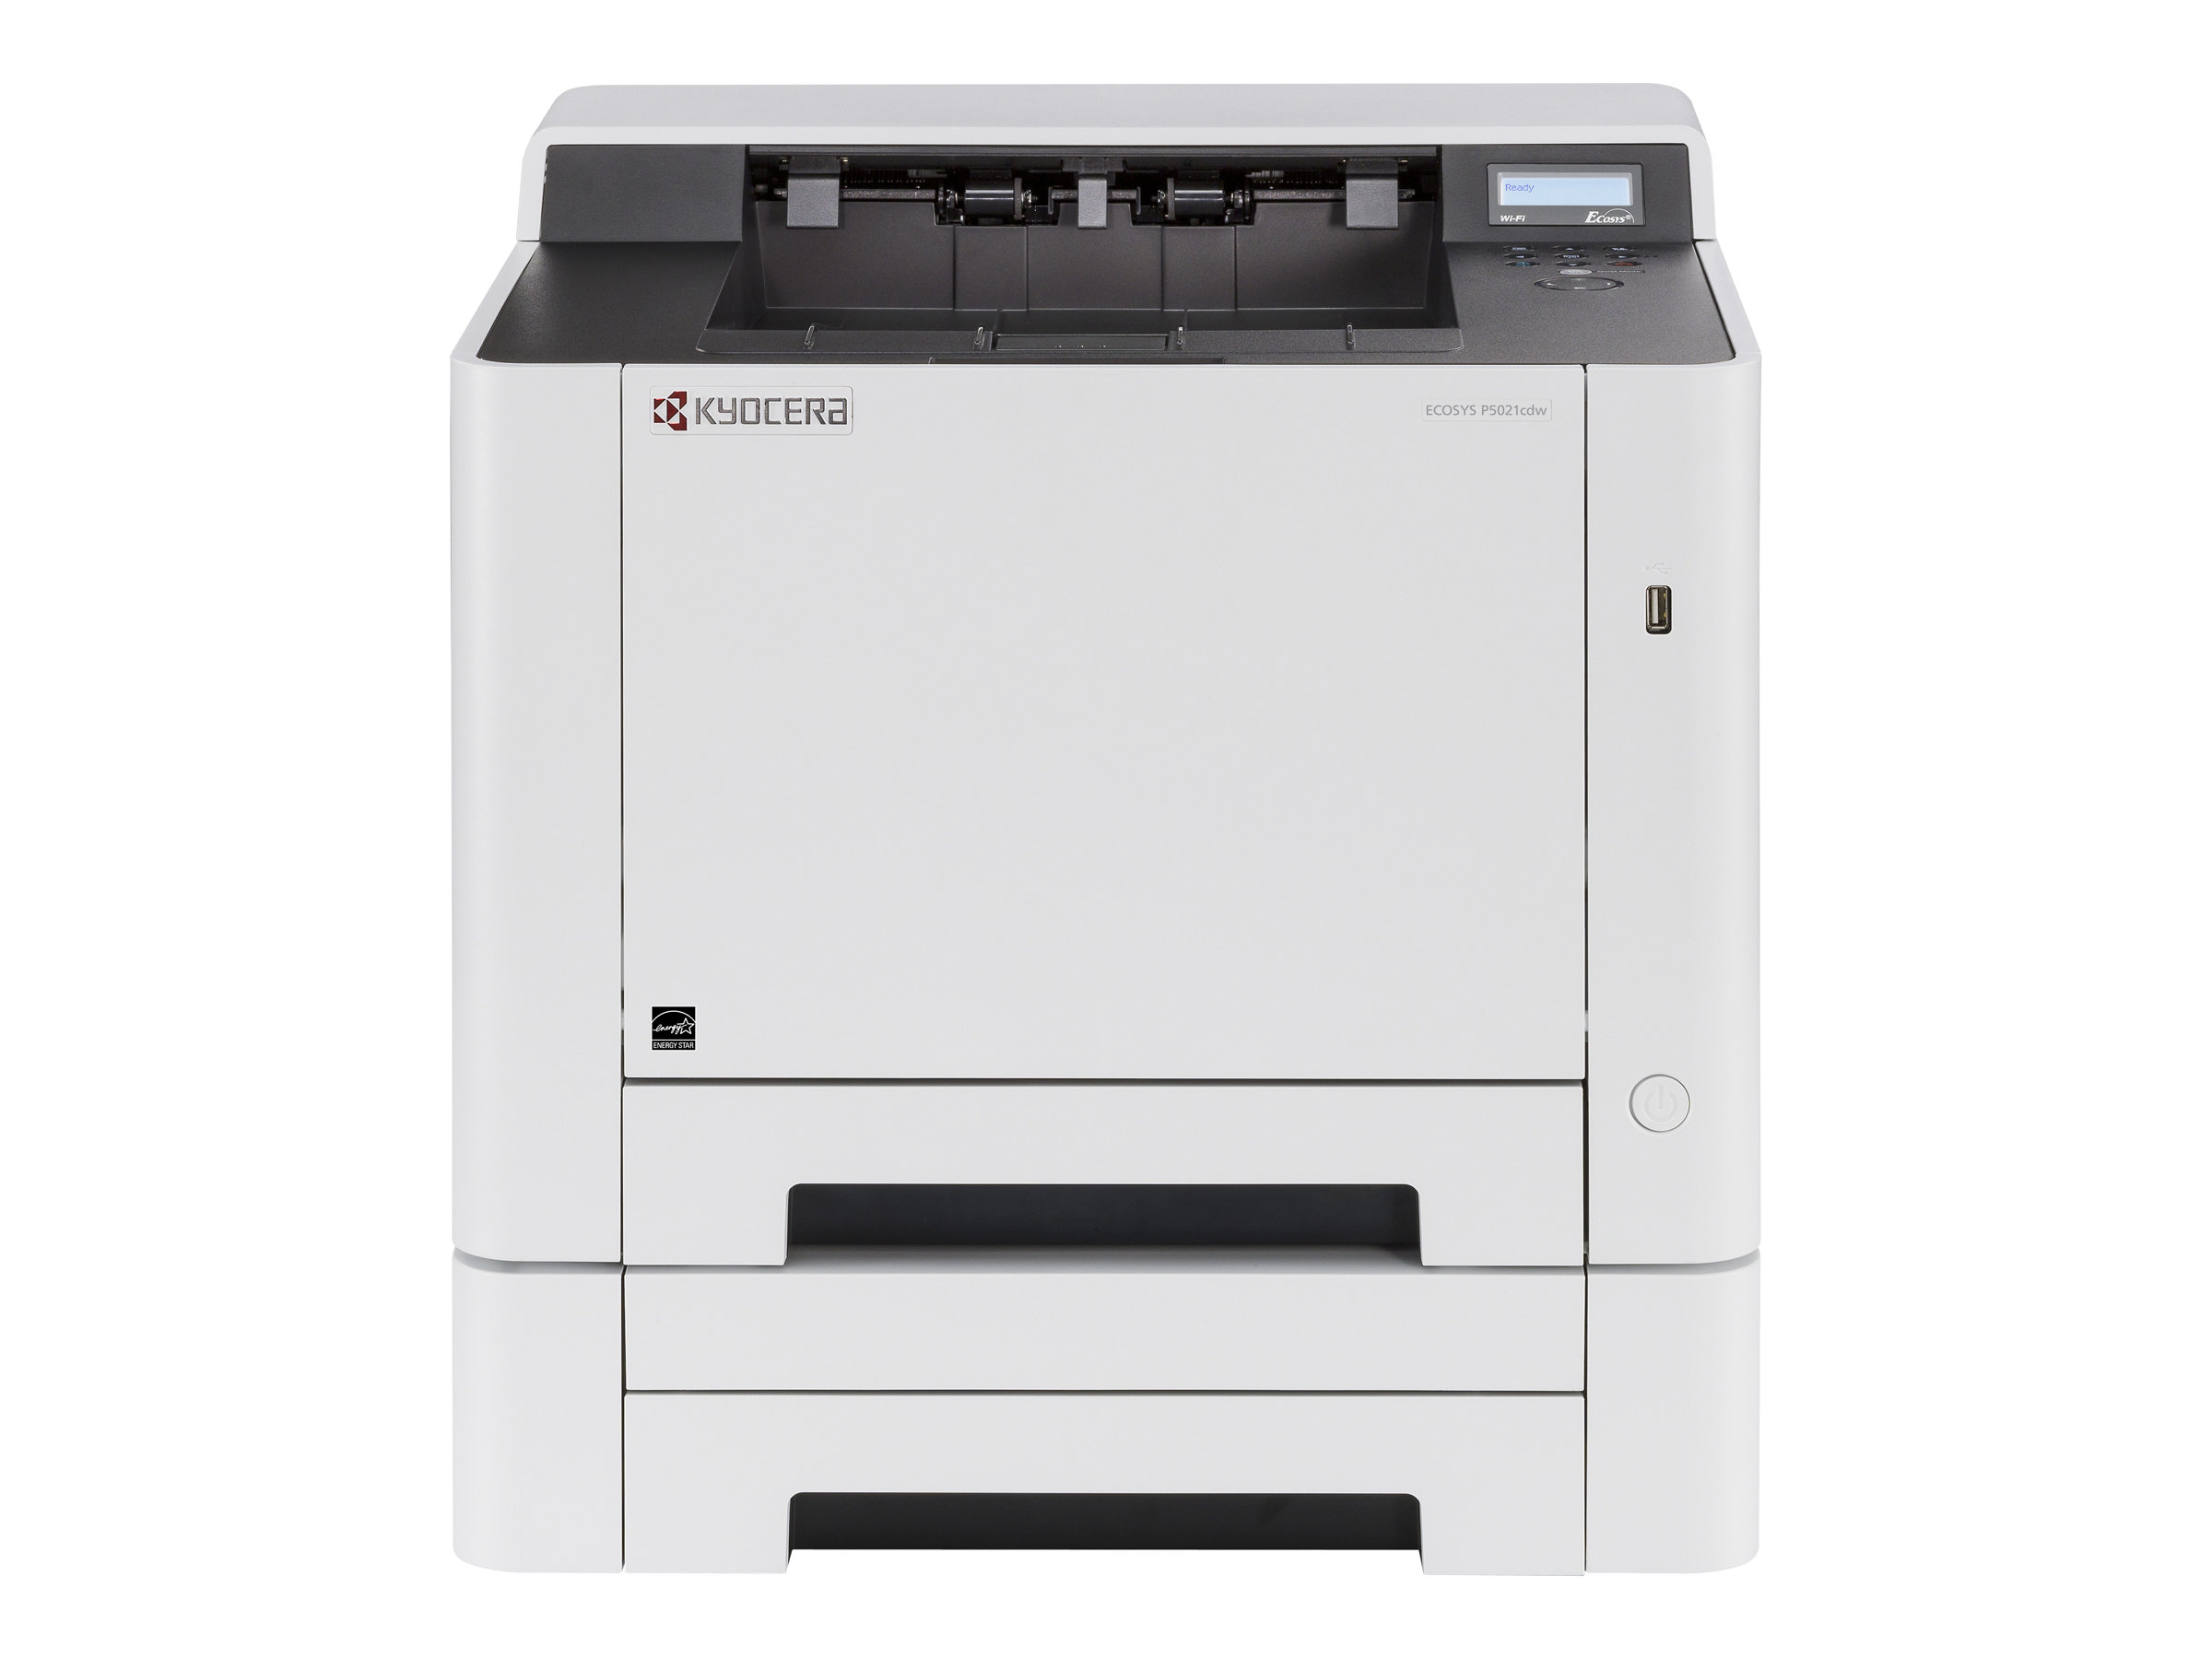 Kyocera ECOSYS P5021cdw - Printer - color - Duplex - laser - A4/Legal - 9600 x 600 dpi - up to 21 ppm (mono) / up to 21 ppm (color) - capacity: 300 sheets - USB 2.0, Gigabit LAN, USB host, Wi-Fi - image 3 of 4